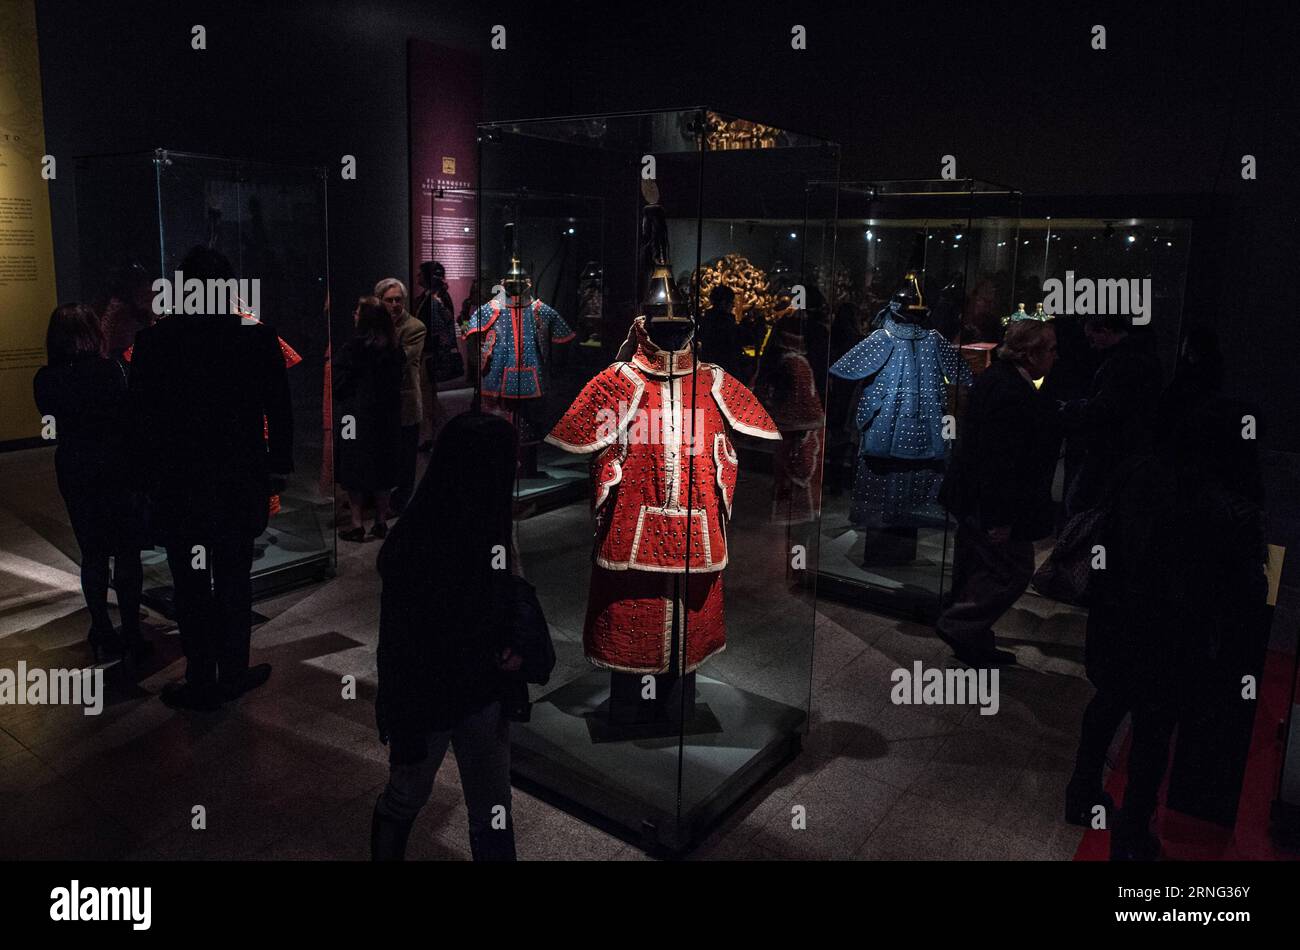 Visitors look on exhibits at the exhibition Forbidden City, Imperial China , in La Moneda Cultural Centre, in Santiago, capital of Chile, on Sept. 2, 2016. From the Palace Museum of Beijing, the exhibition will remain open from Sept. 3 to Nov. 27, presenting a treasure collection of the emperors of the Ming and Qing Dinasties, in the framework of the year of the Cultural Exchange between China and Latin America and the Caribbean. ) (rtg) (syq) CHILE-SANTIAGO-CHINA-EXHIBITION JORGExVILLEGAS PUBLICATIONxNOTxINxCHN   Visitors Look ON Exhibits AT The Exhibition Forbidden City Imperial China in La Stock Photo